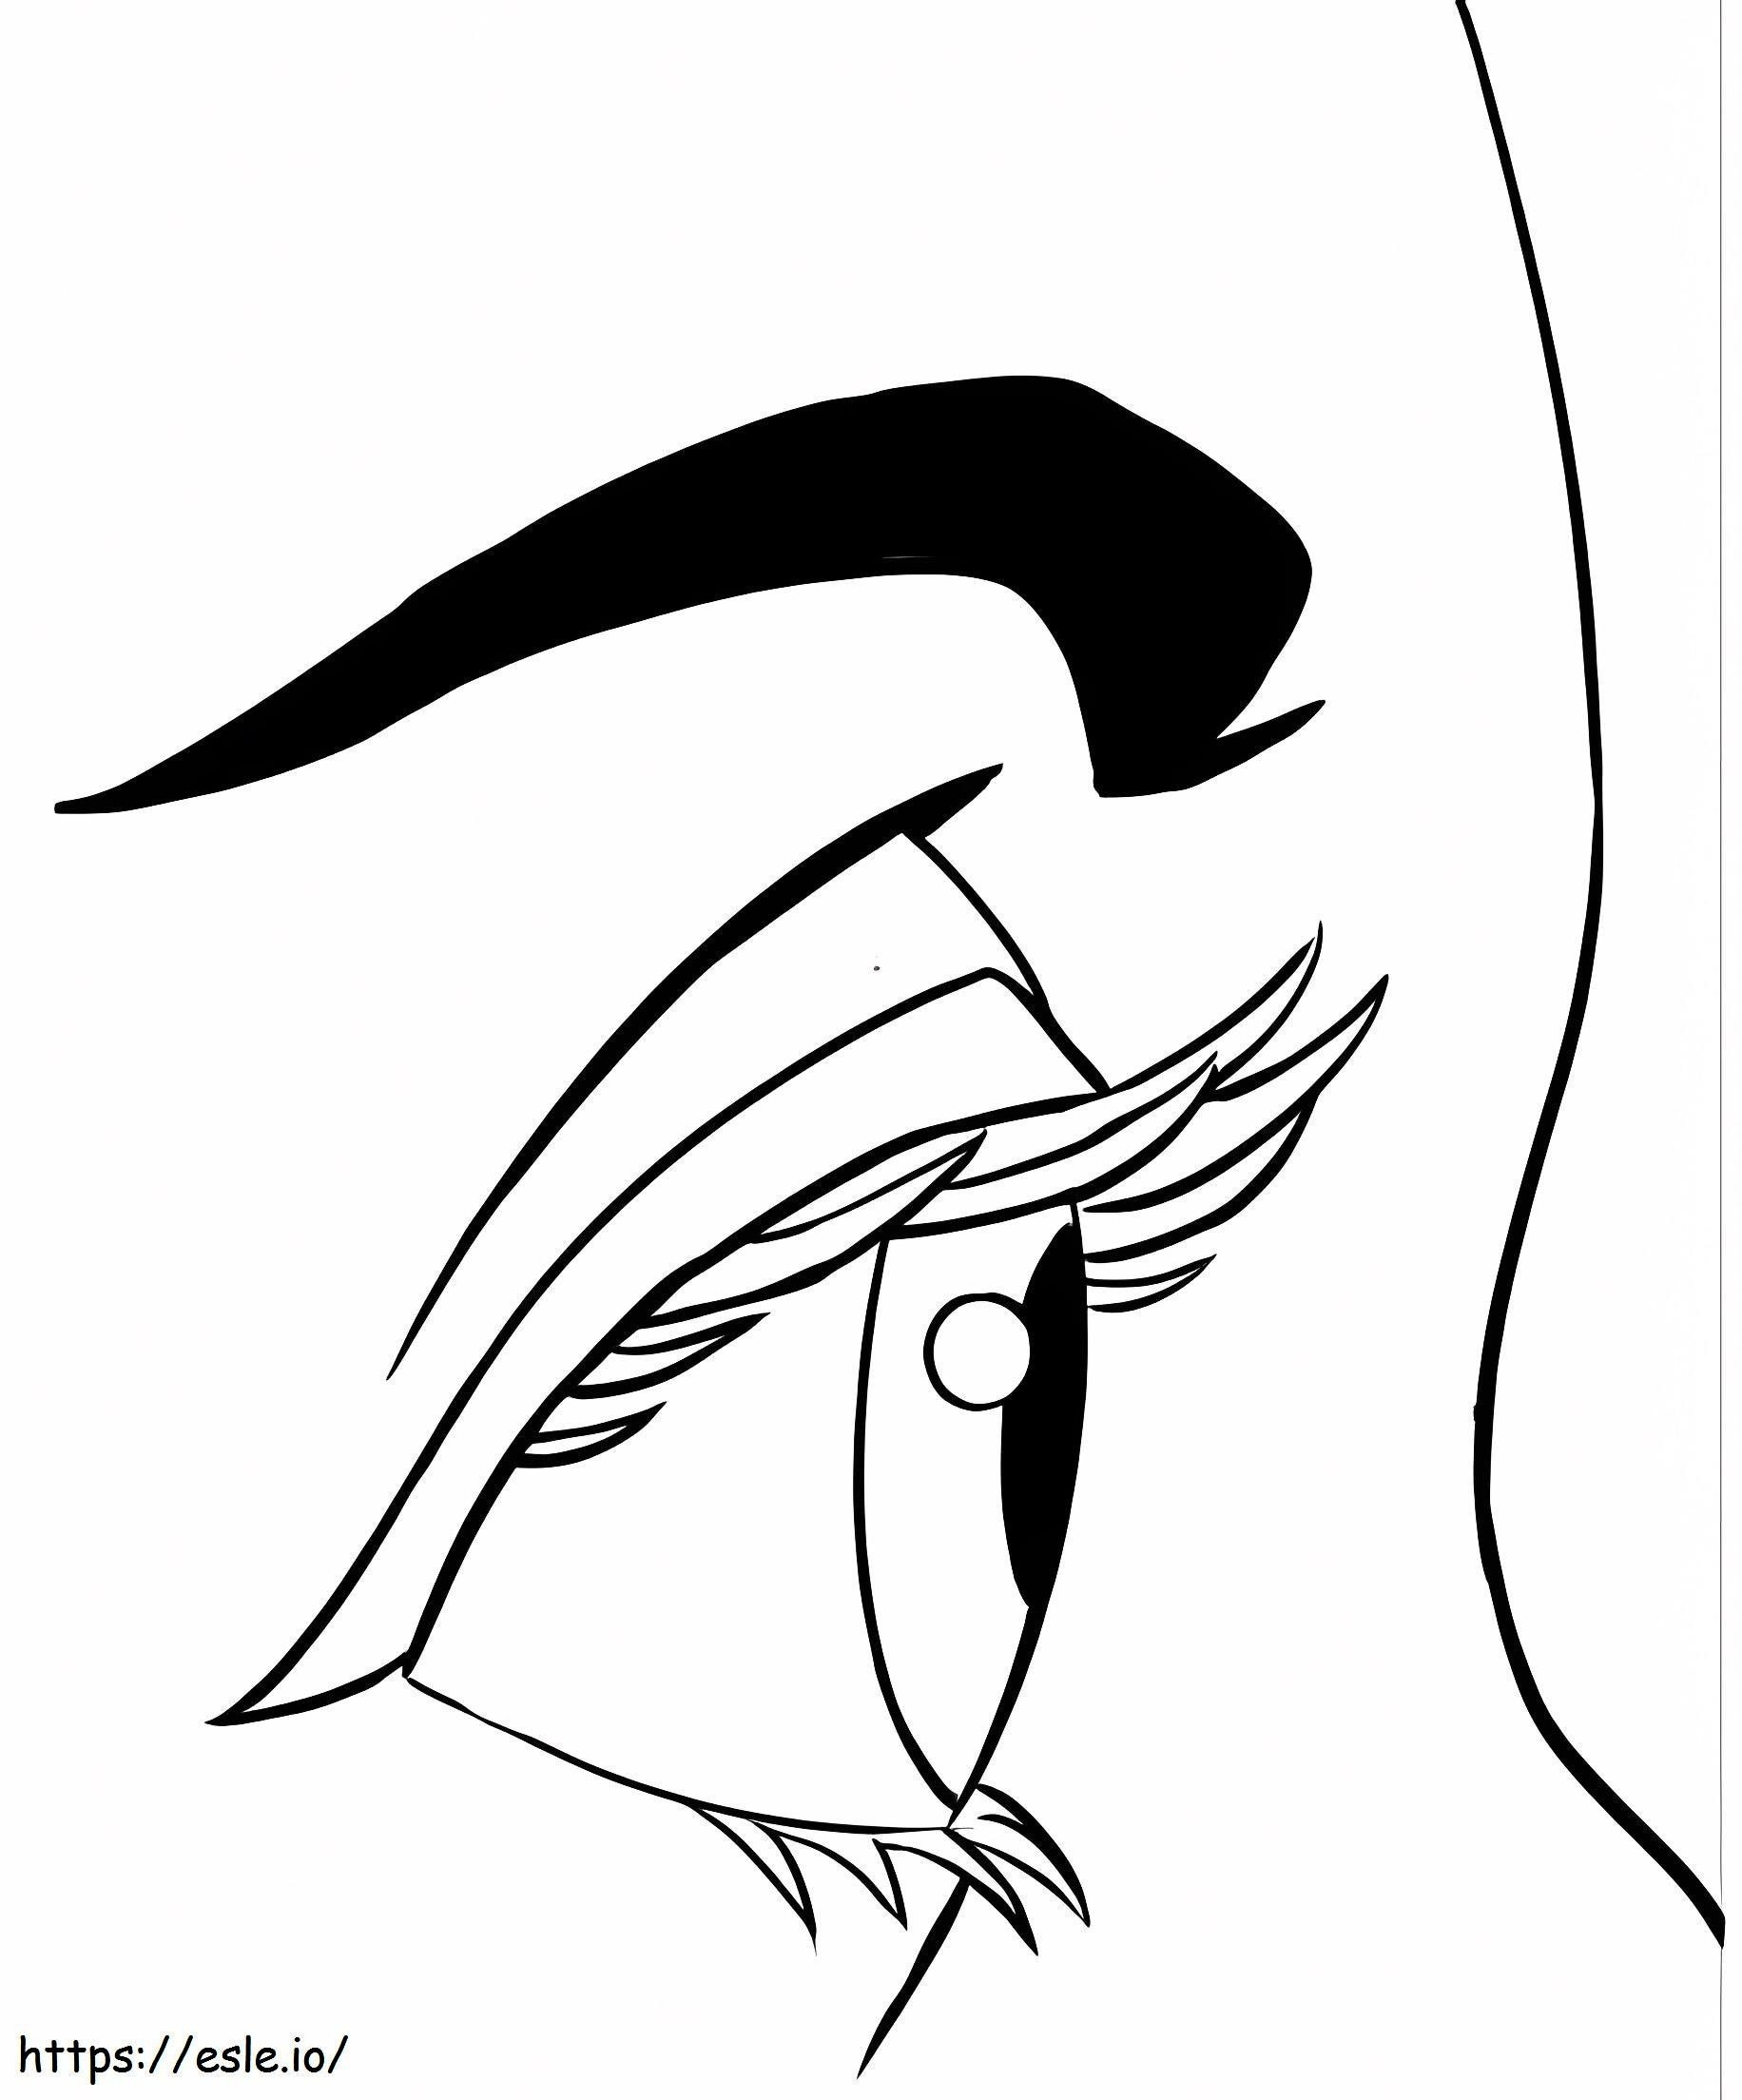 Lady Eye coloring page